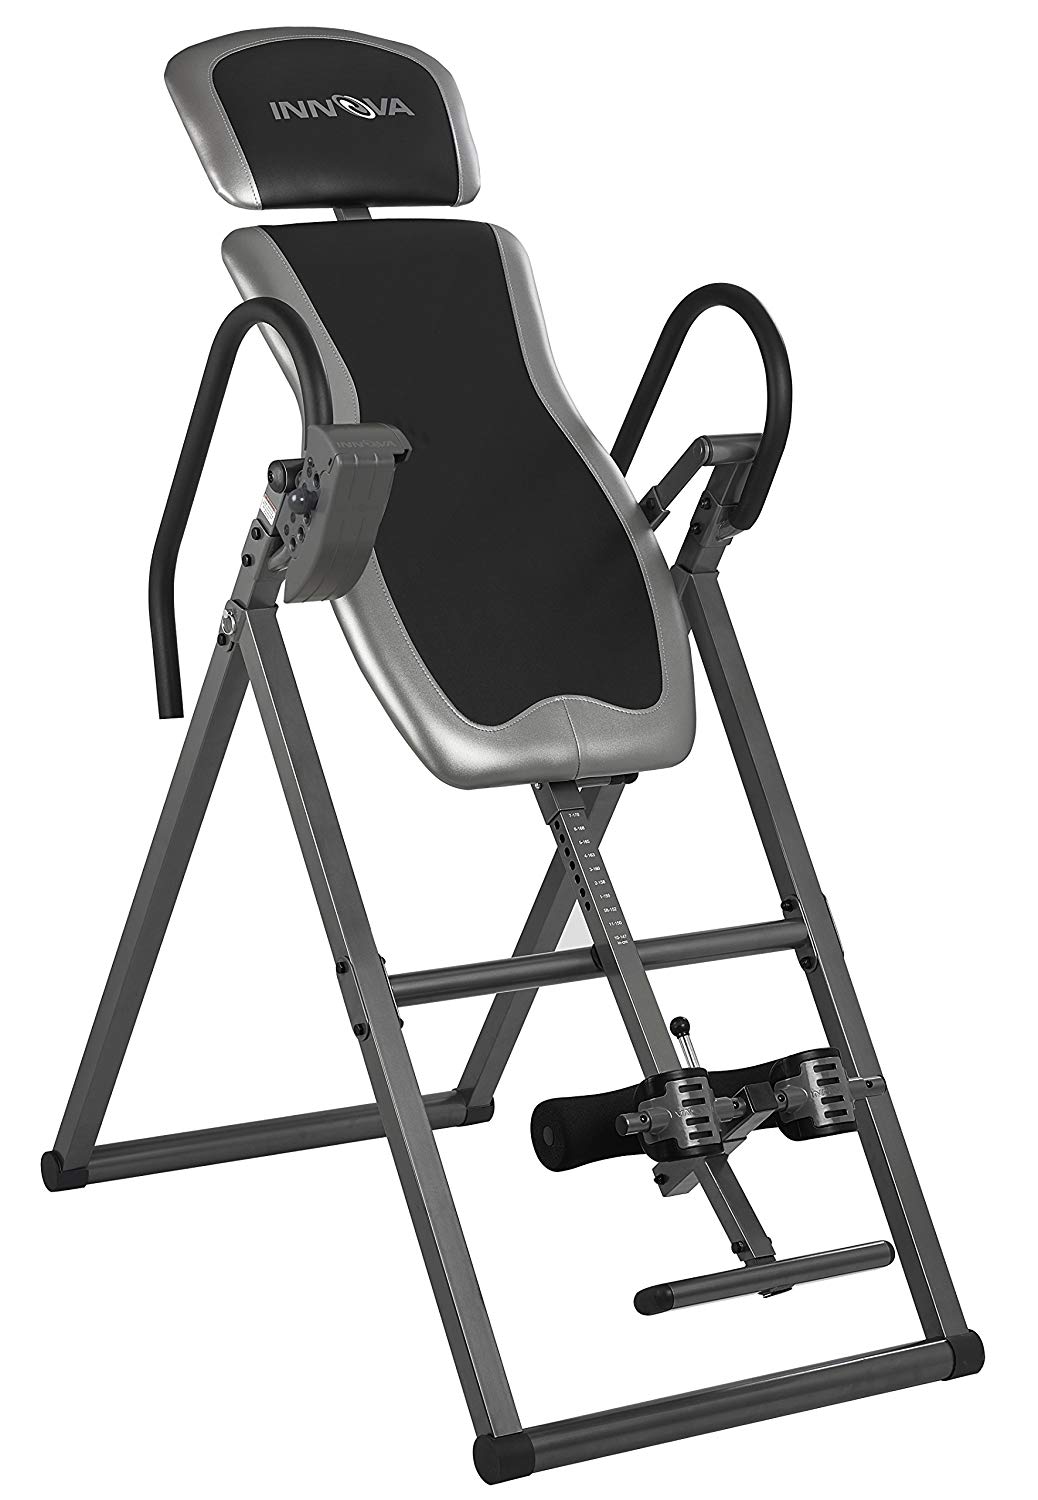 Innova ITX9600 Heavy Duty Inversion Table with Adjustable Headrest and Protective Cover, One Size